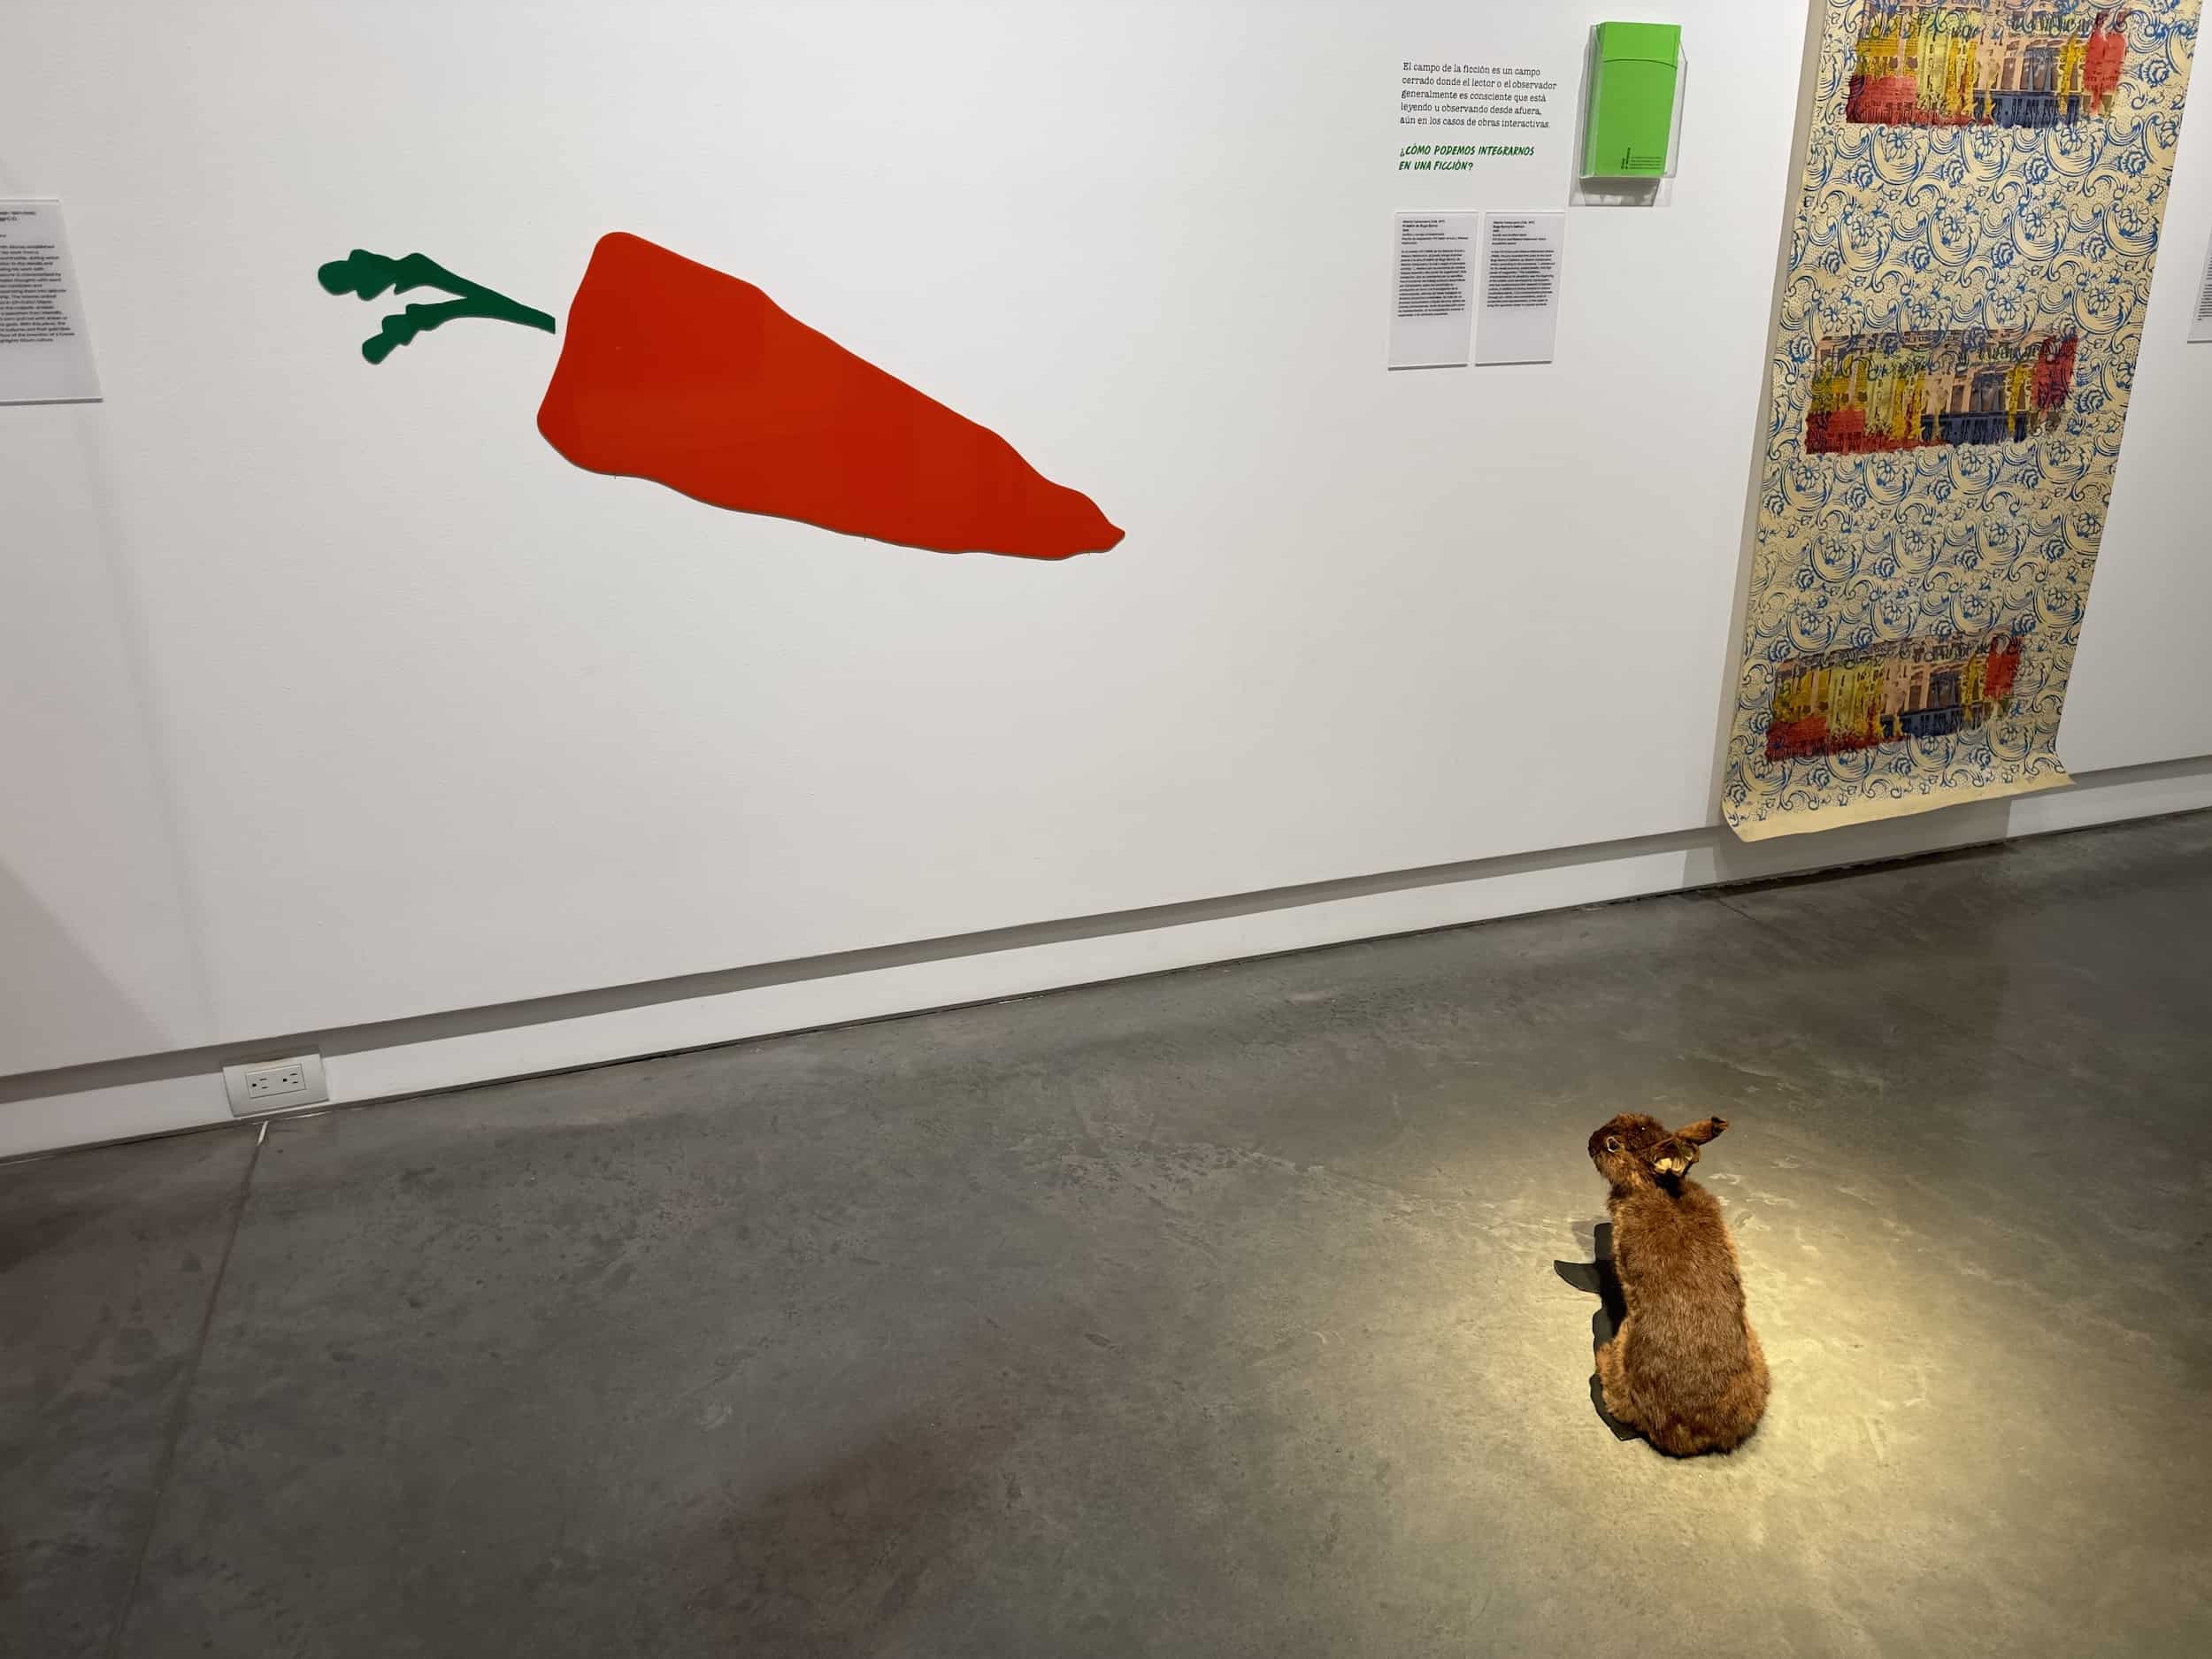 Bugs Bunny's Delirium by Alberto Campuzano (1996), acrylic and stuffed rabbit at the Medellín Museum of Modern Art in Medellín, Antioquia, Colombia